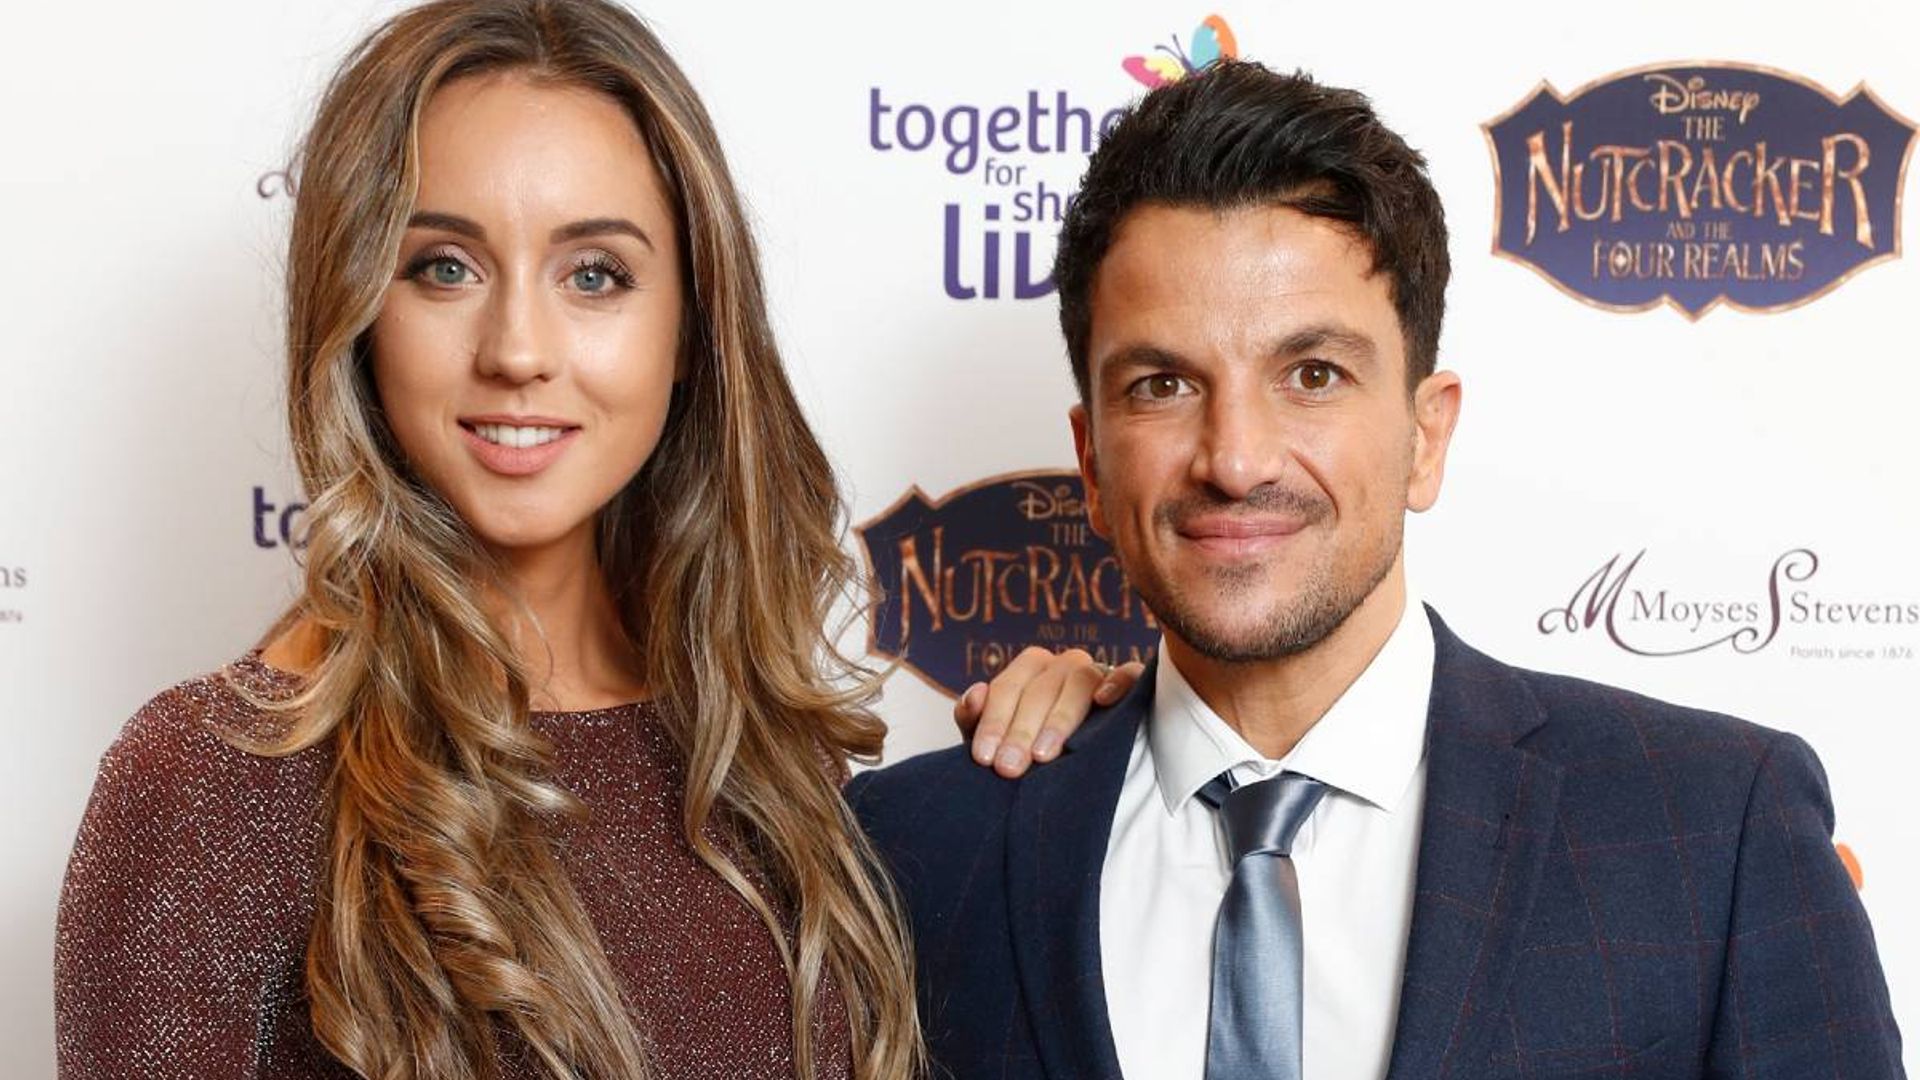 Peter Andre breaks silence after Katie Price criticises his wife Emily